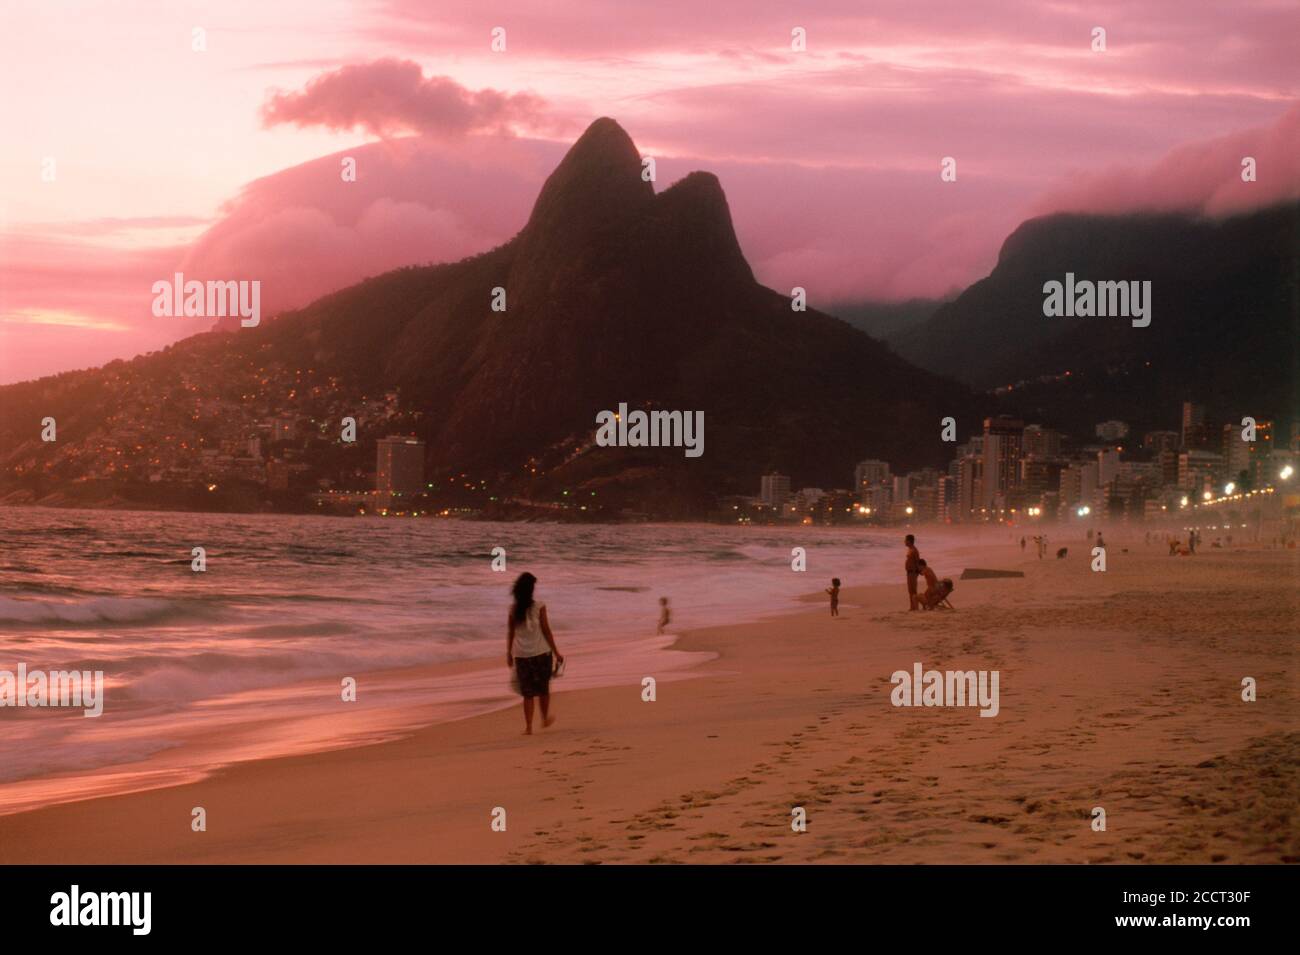 Woman on sandy shores of Ipanema in Rio de Janeiro at sunset with the two mountains called the Dois Irmãos or The Brothers Stock Photo